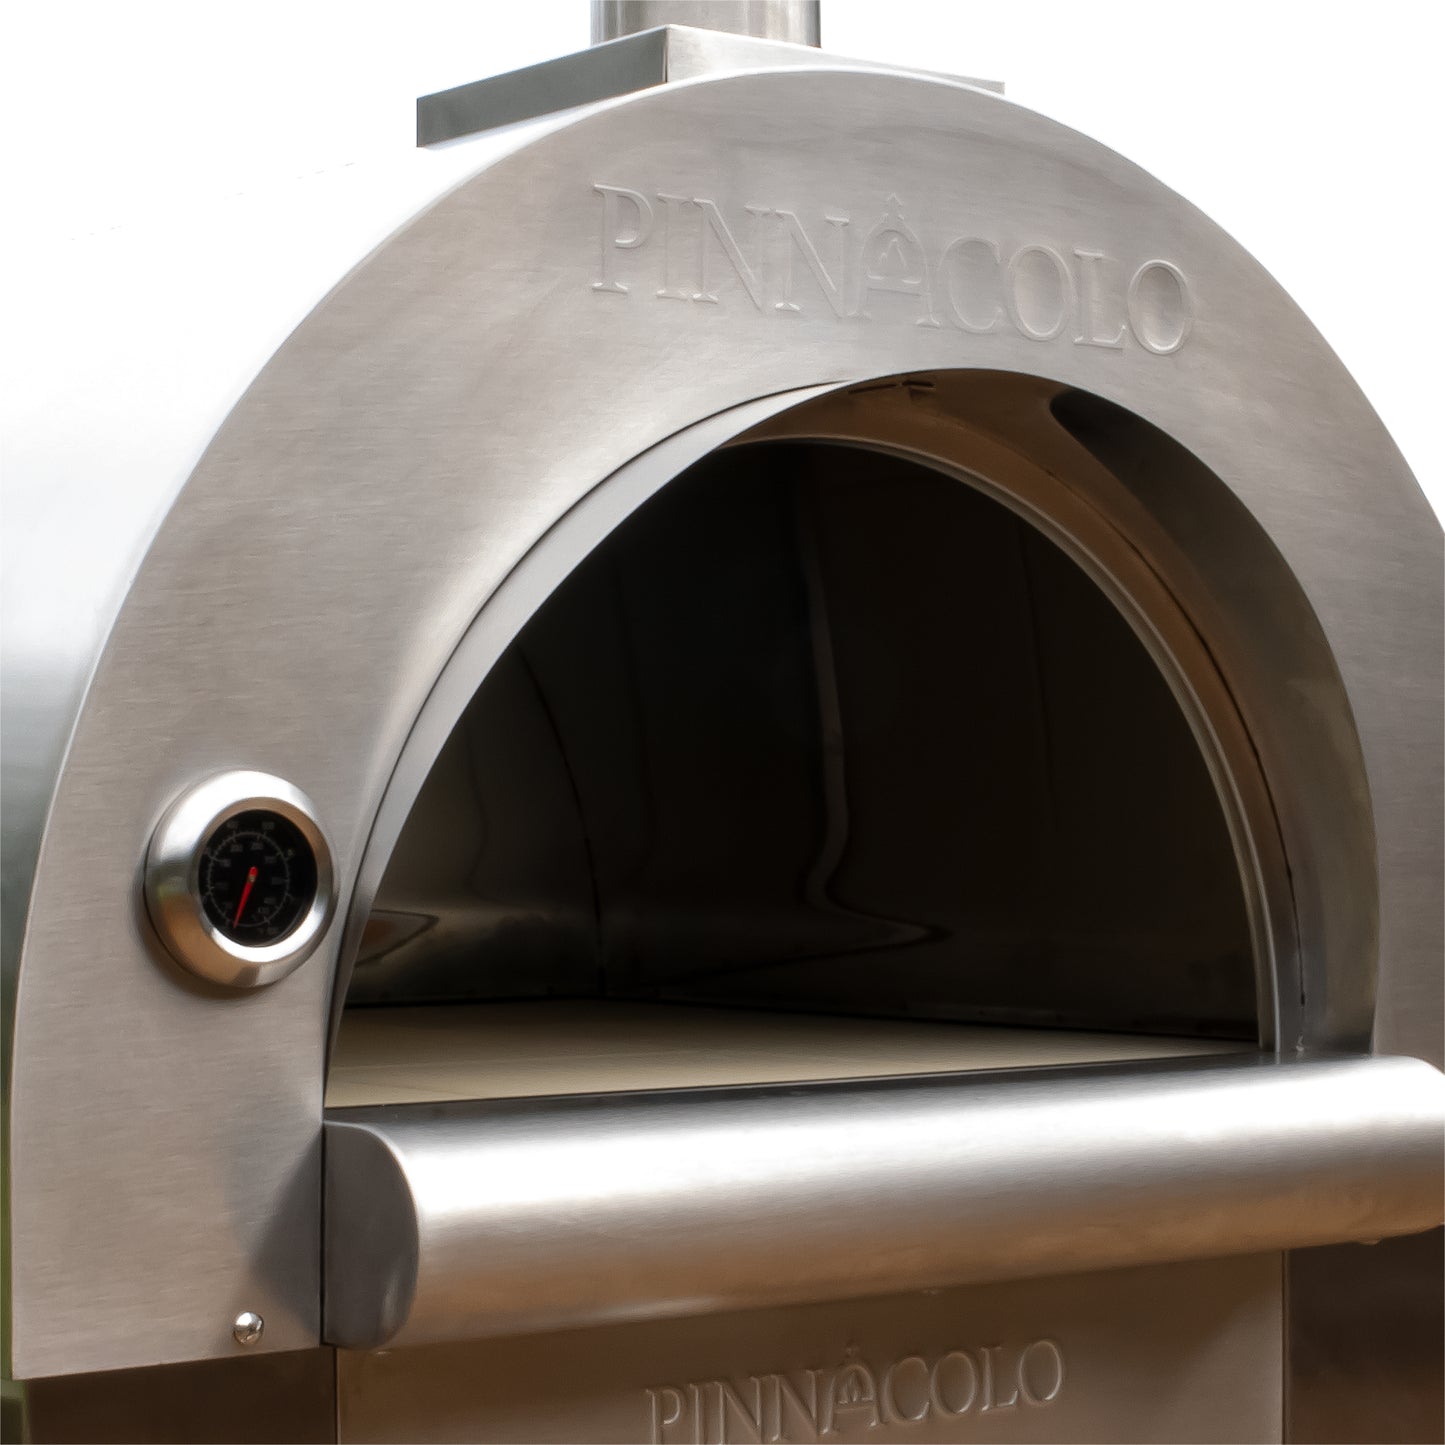 PINNACOLO | PREMIO Wood Fired Outdoor Pizza Oven with Accessories - PPO102 left side